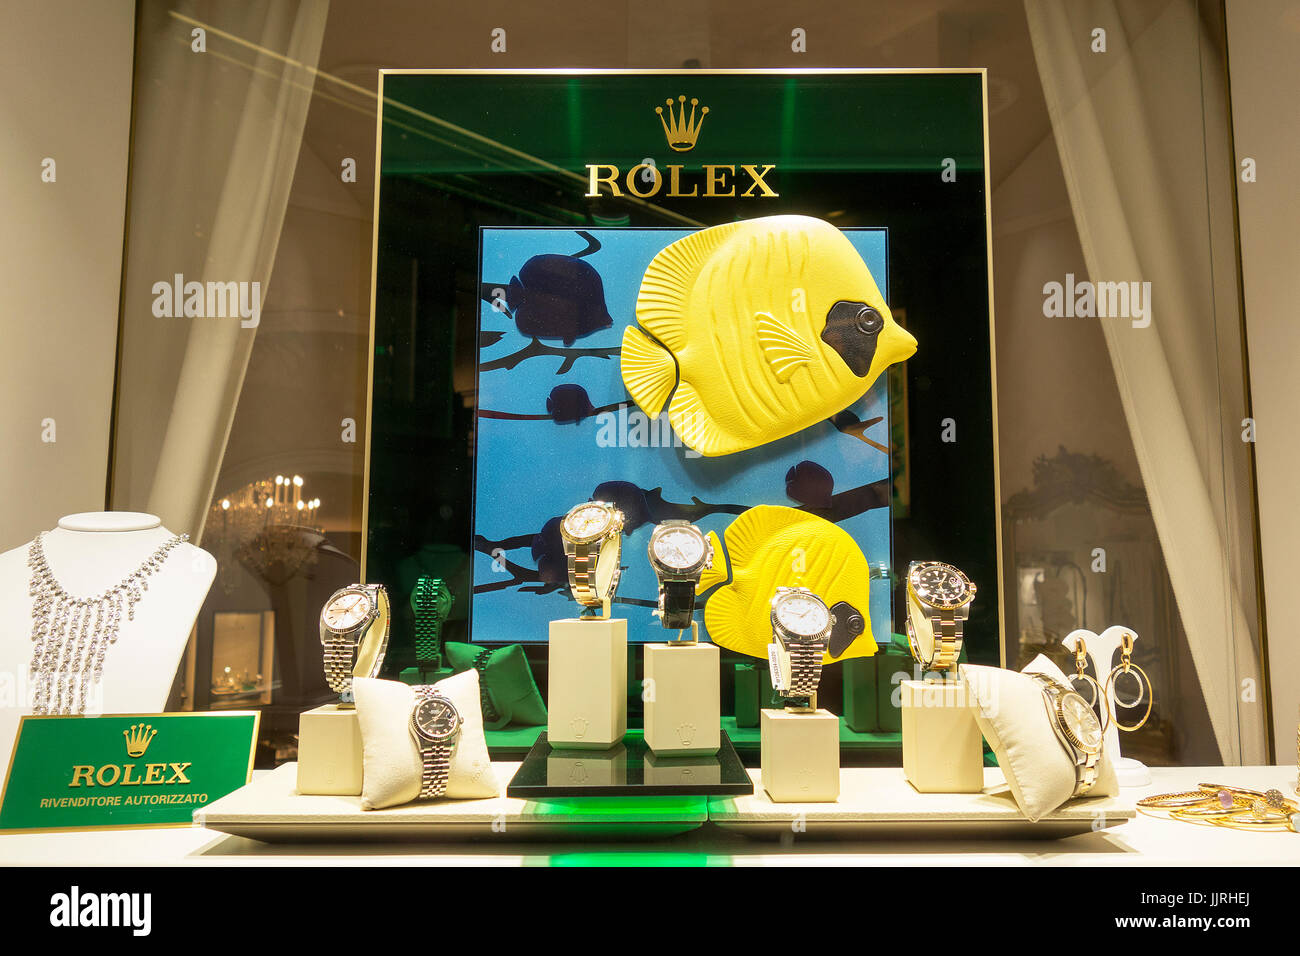 Rolex watches on display in a shop window Stock Photo